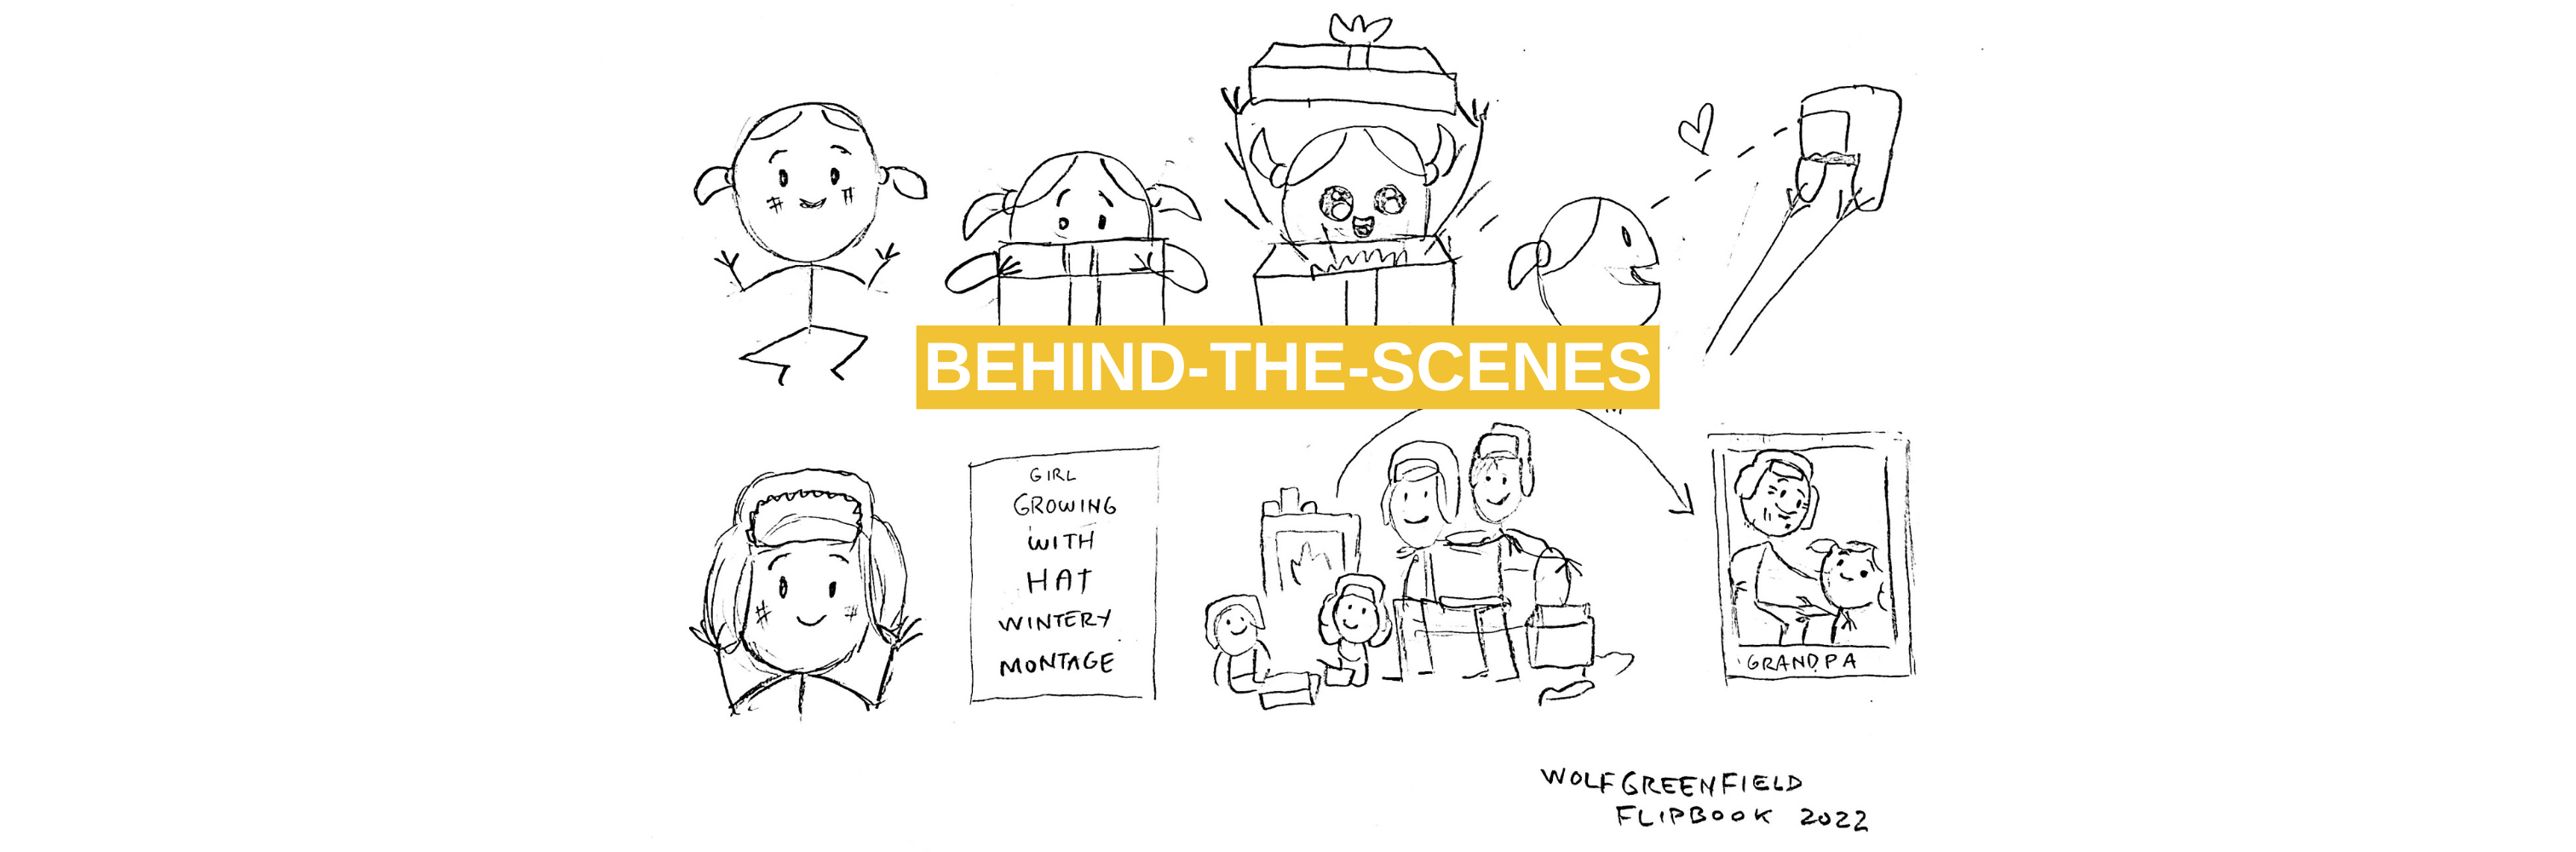 2022 Holiday Card - Behind the Scenes V3